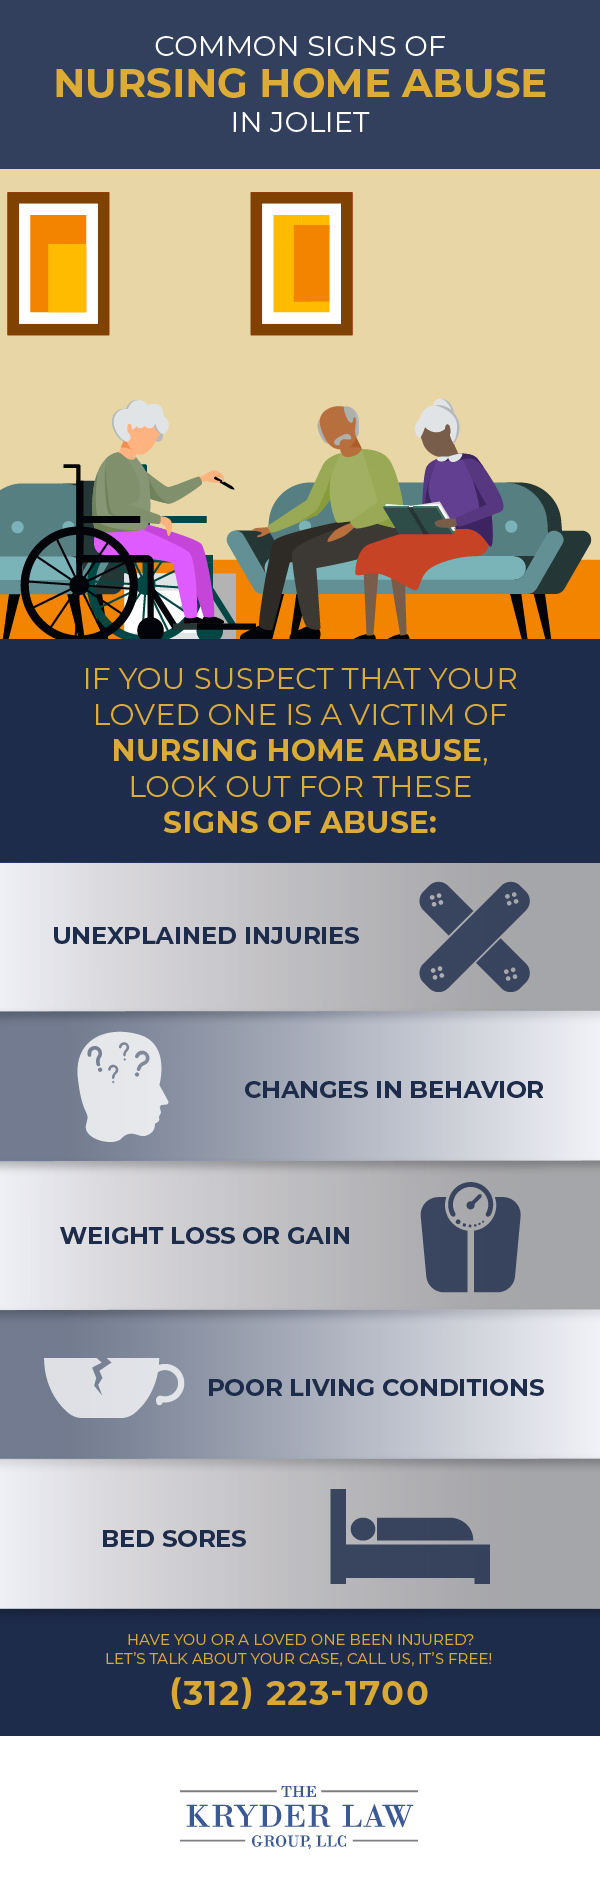 Common signs of Nursing Home Abuse in Joliet Infographic